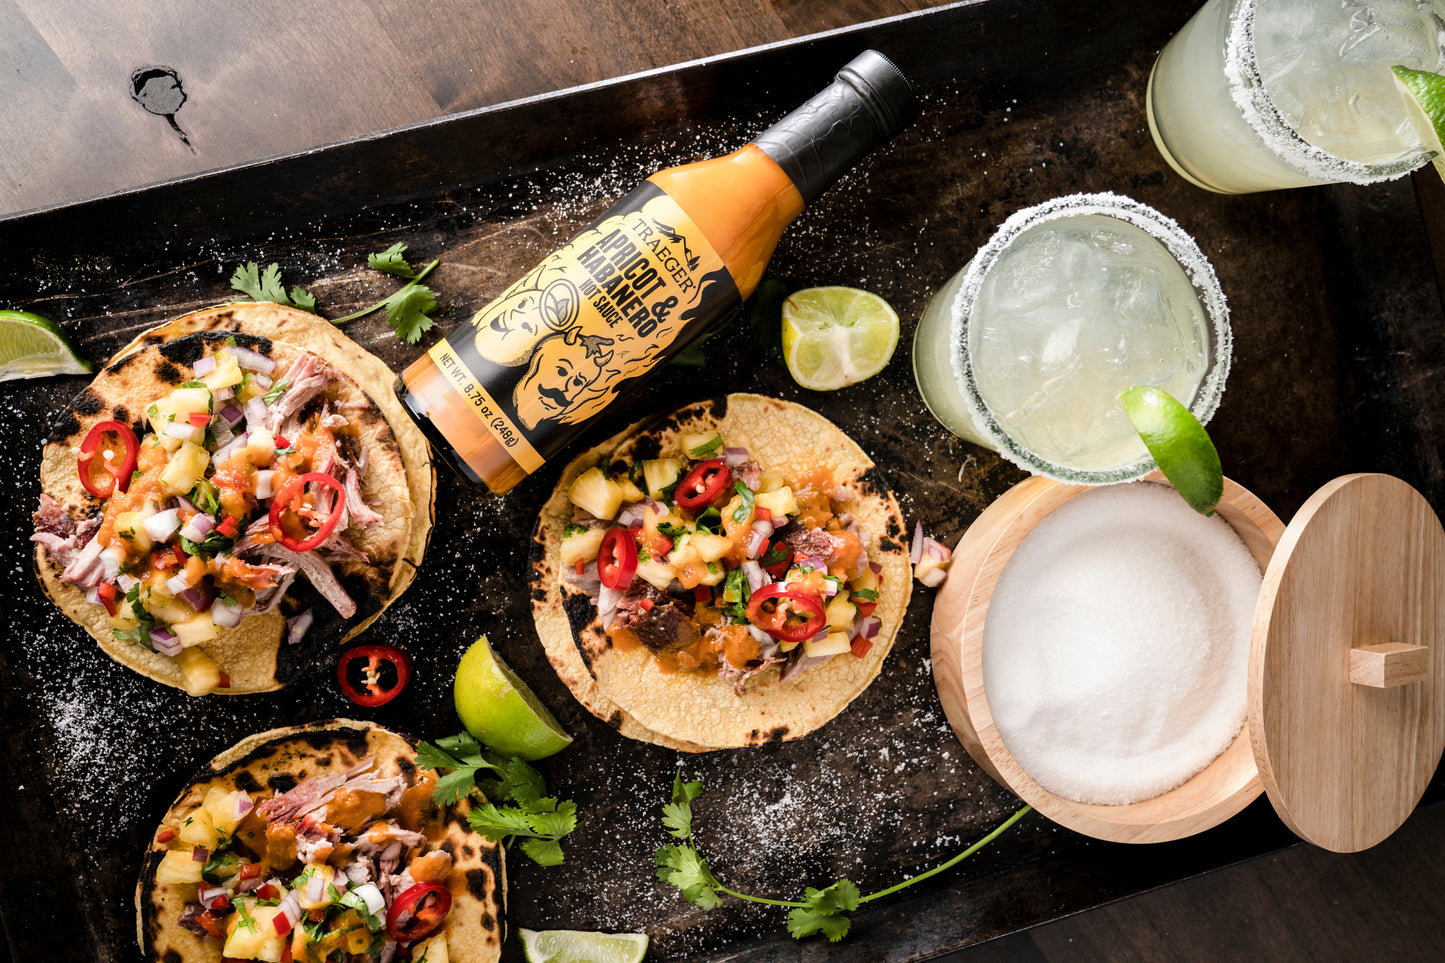 Traeger suggests serving Apricot & Habanero hot sauce with tostadas and other Tex Mex meals.